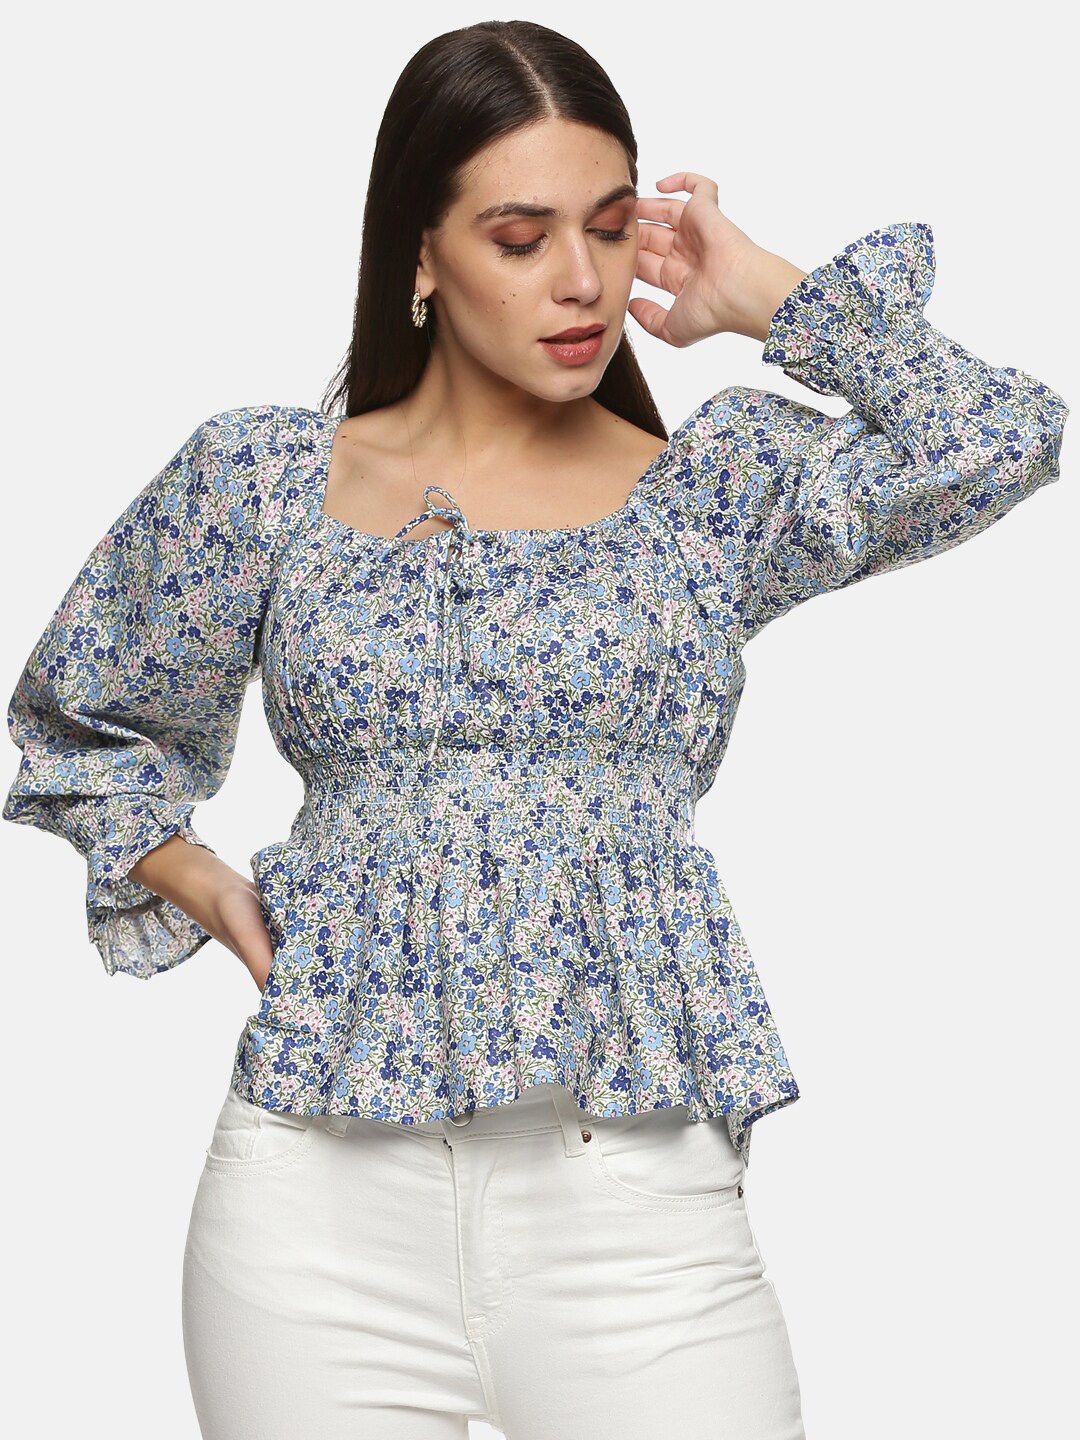 ISU Women White & Blue Floral Printed Smocked Pure Cotton Cinched Waist Top Price in India